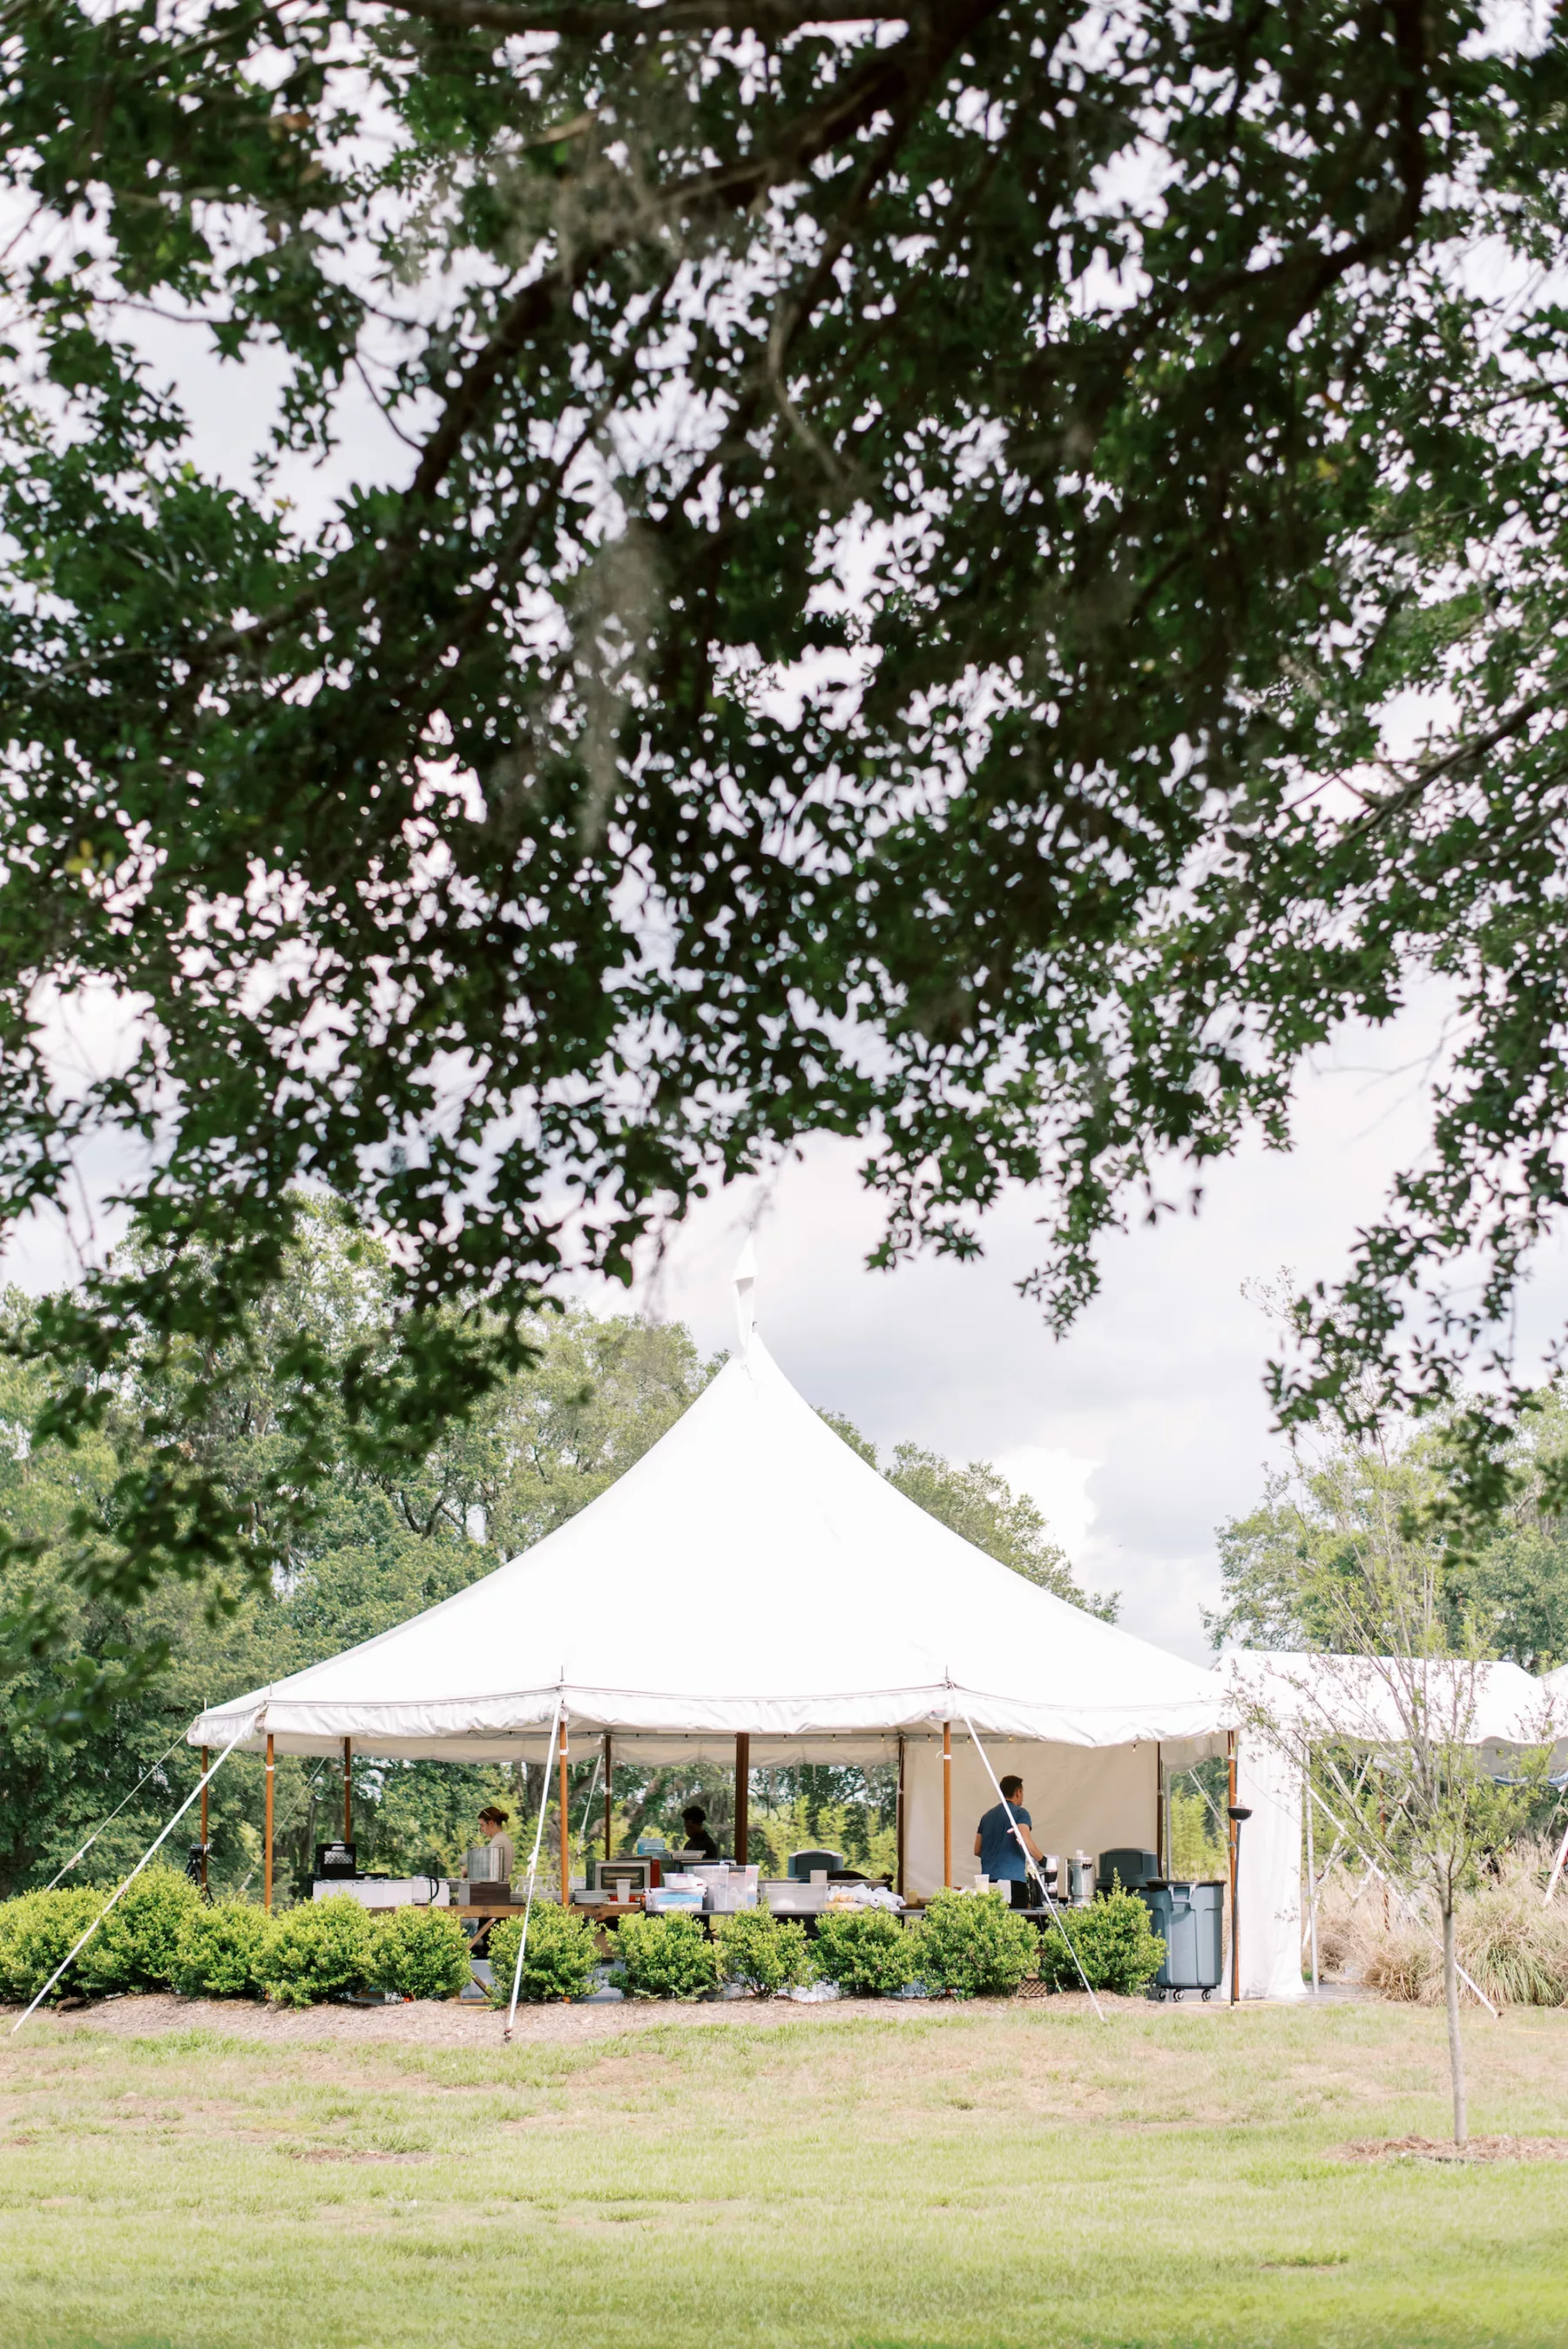 The Grand Meadow Outdoor Tented Wedding Reception Ideas | Tampa Bay Event Venue Mill Pond Estate